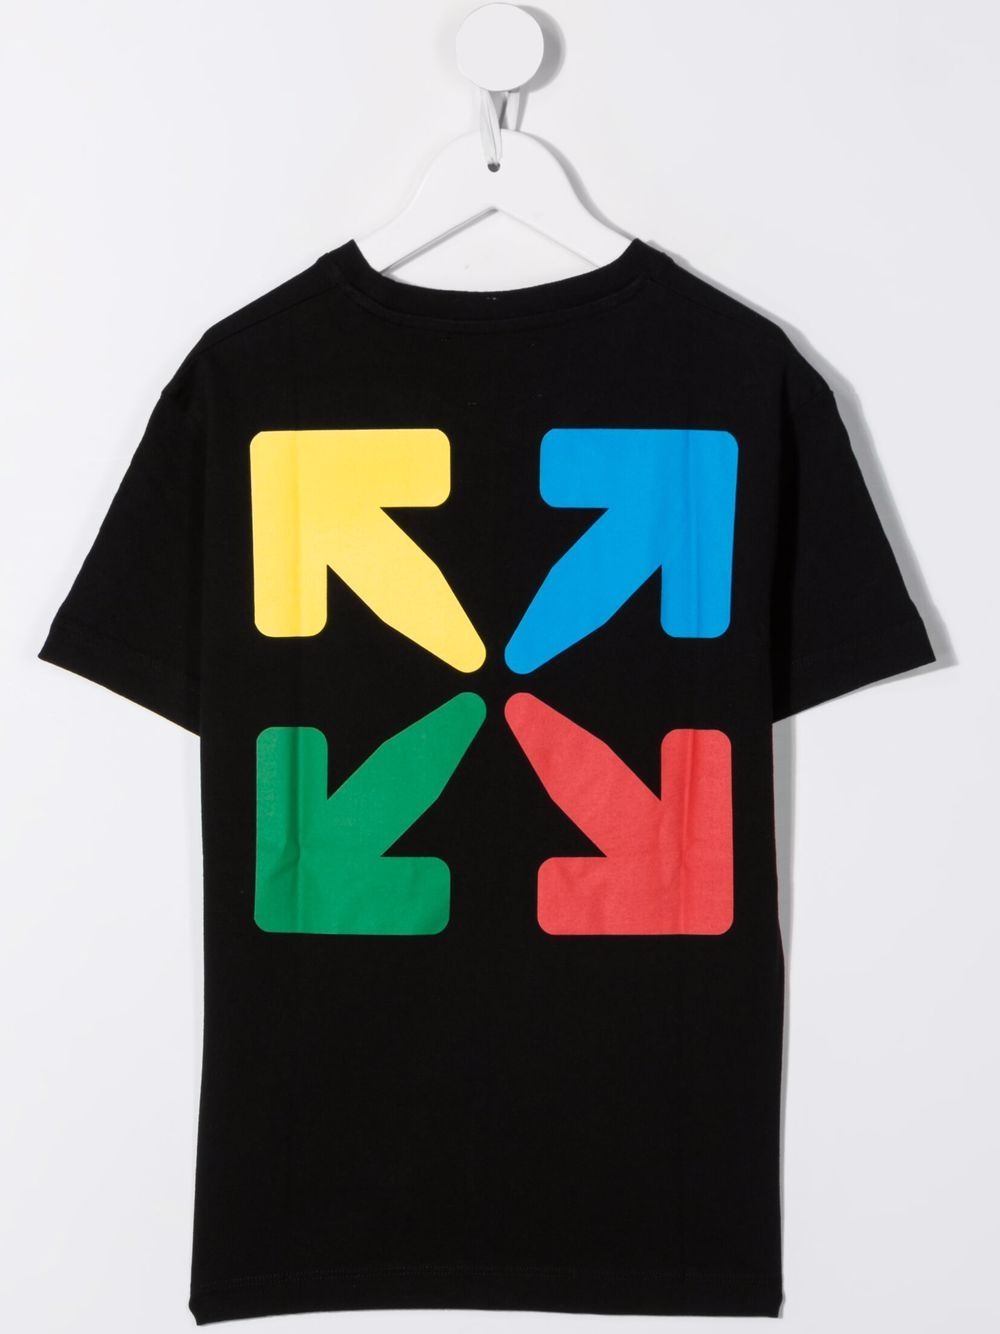 Kids off rounded tee shirt black